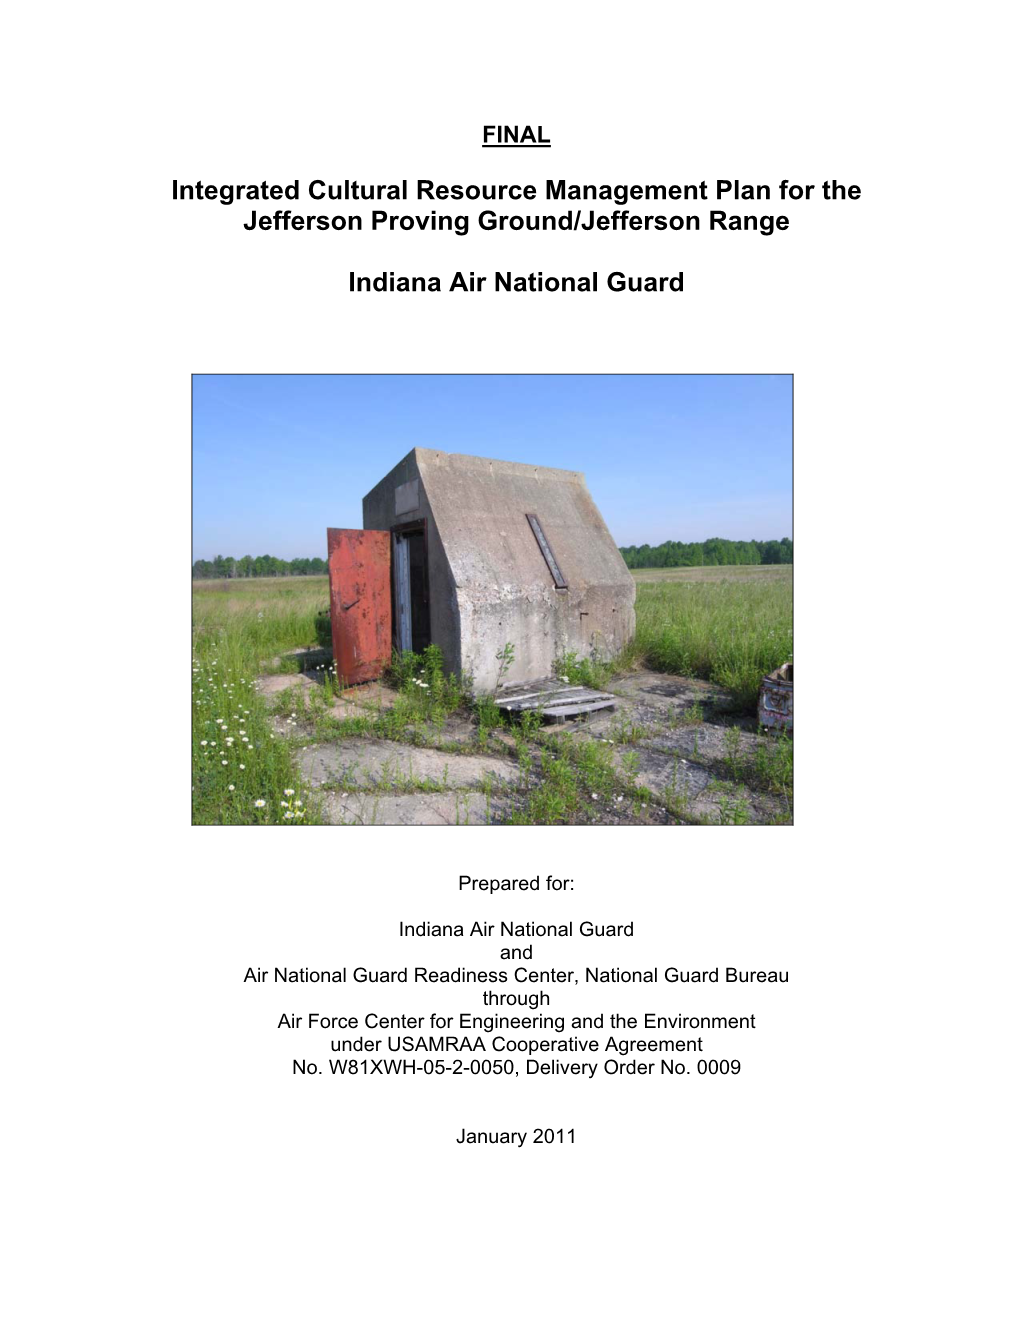 Final Integrated Cultural Resource Management Plan for Jefferson